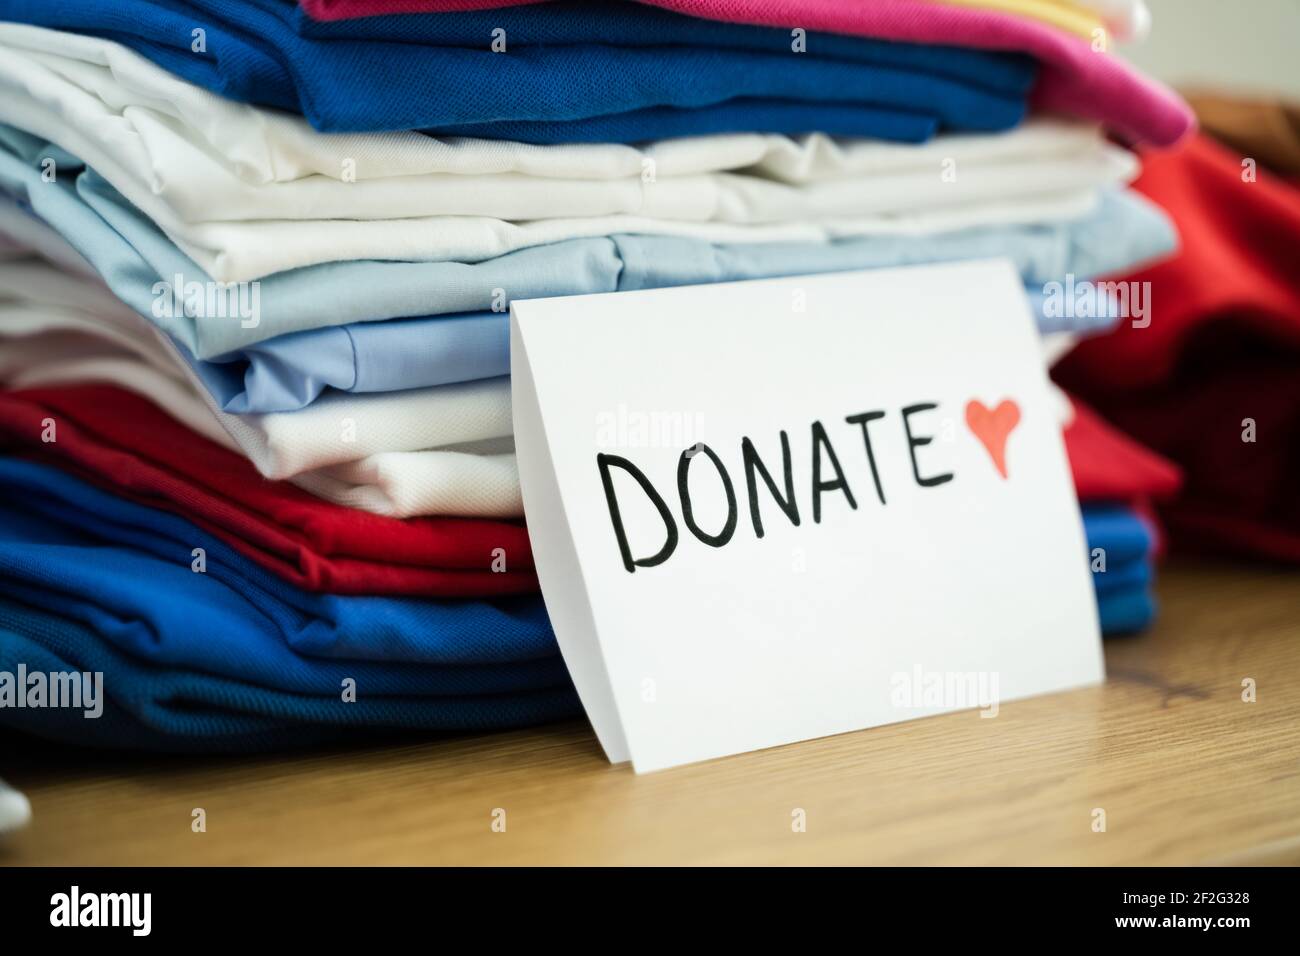 https://c8.alamy.com/comp/2F2G328/clothes-donation-and-social-service-giving-donations-to-poor-2F2G328.jpg